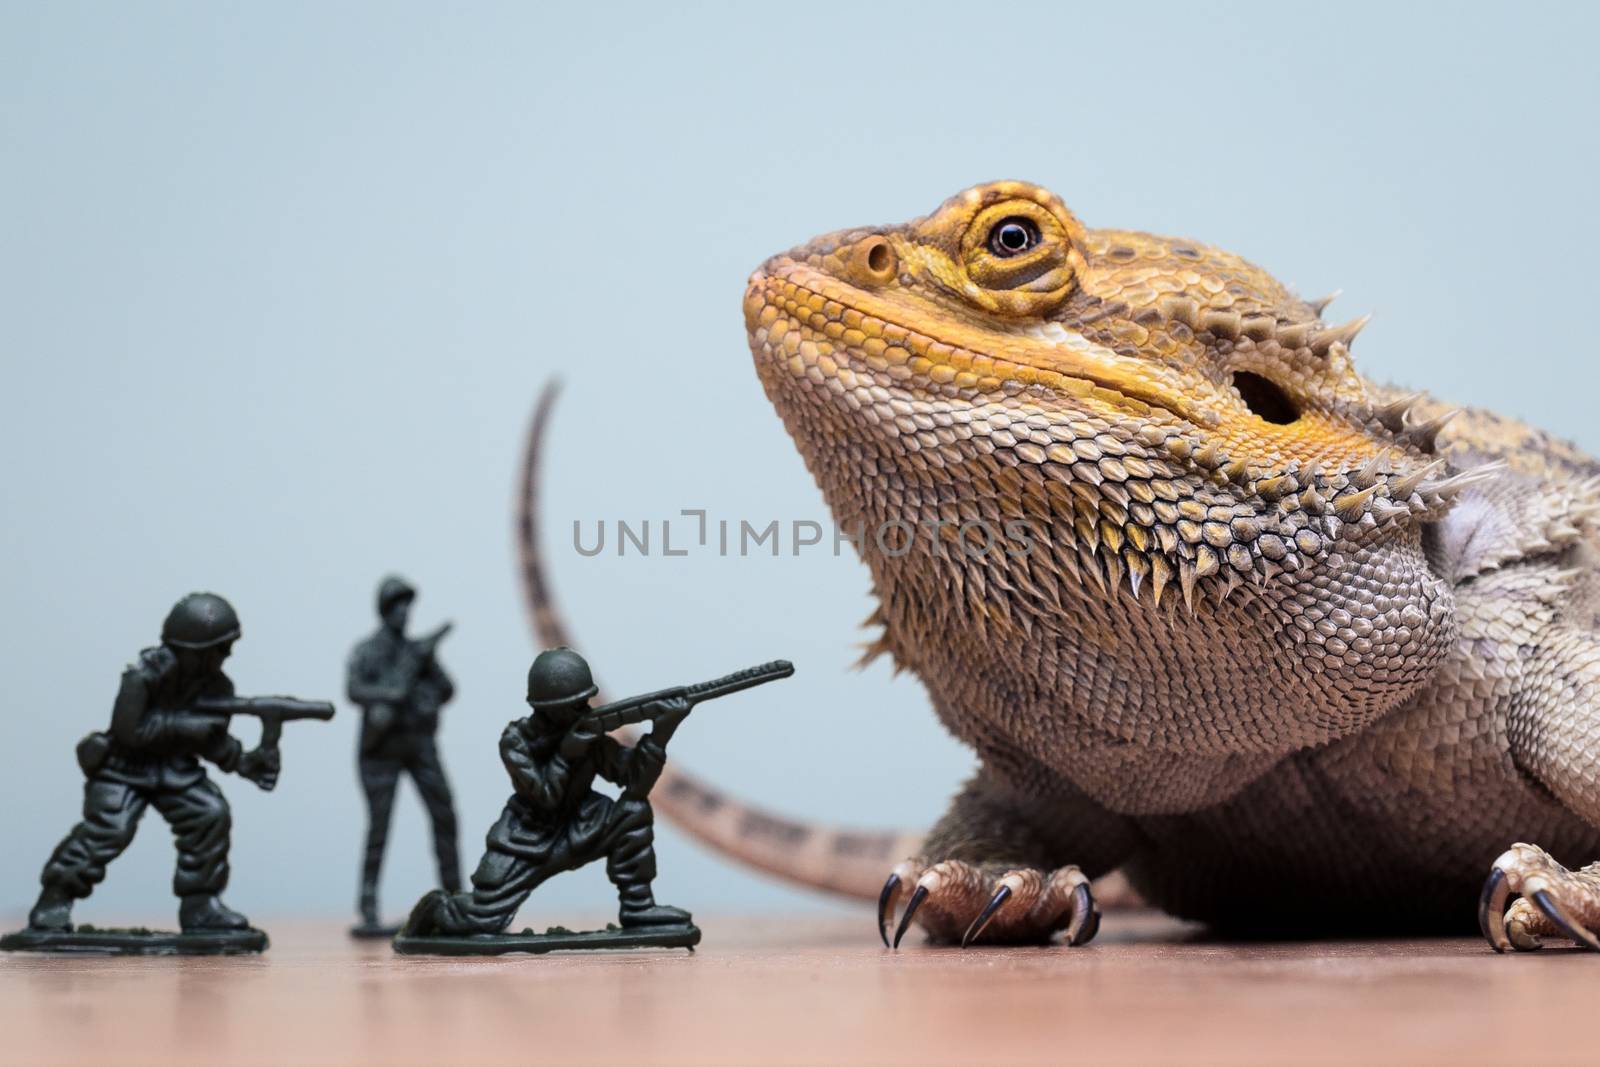 bearded dragon monster attacked by plastic soldiers